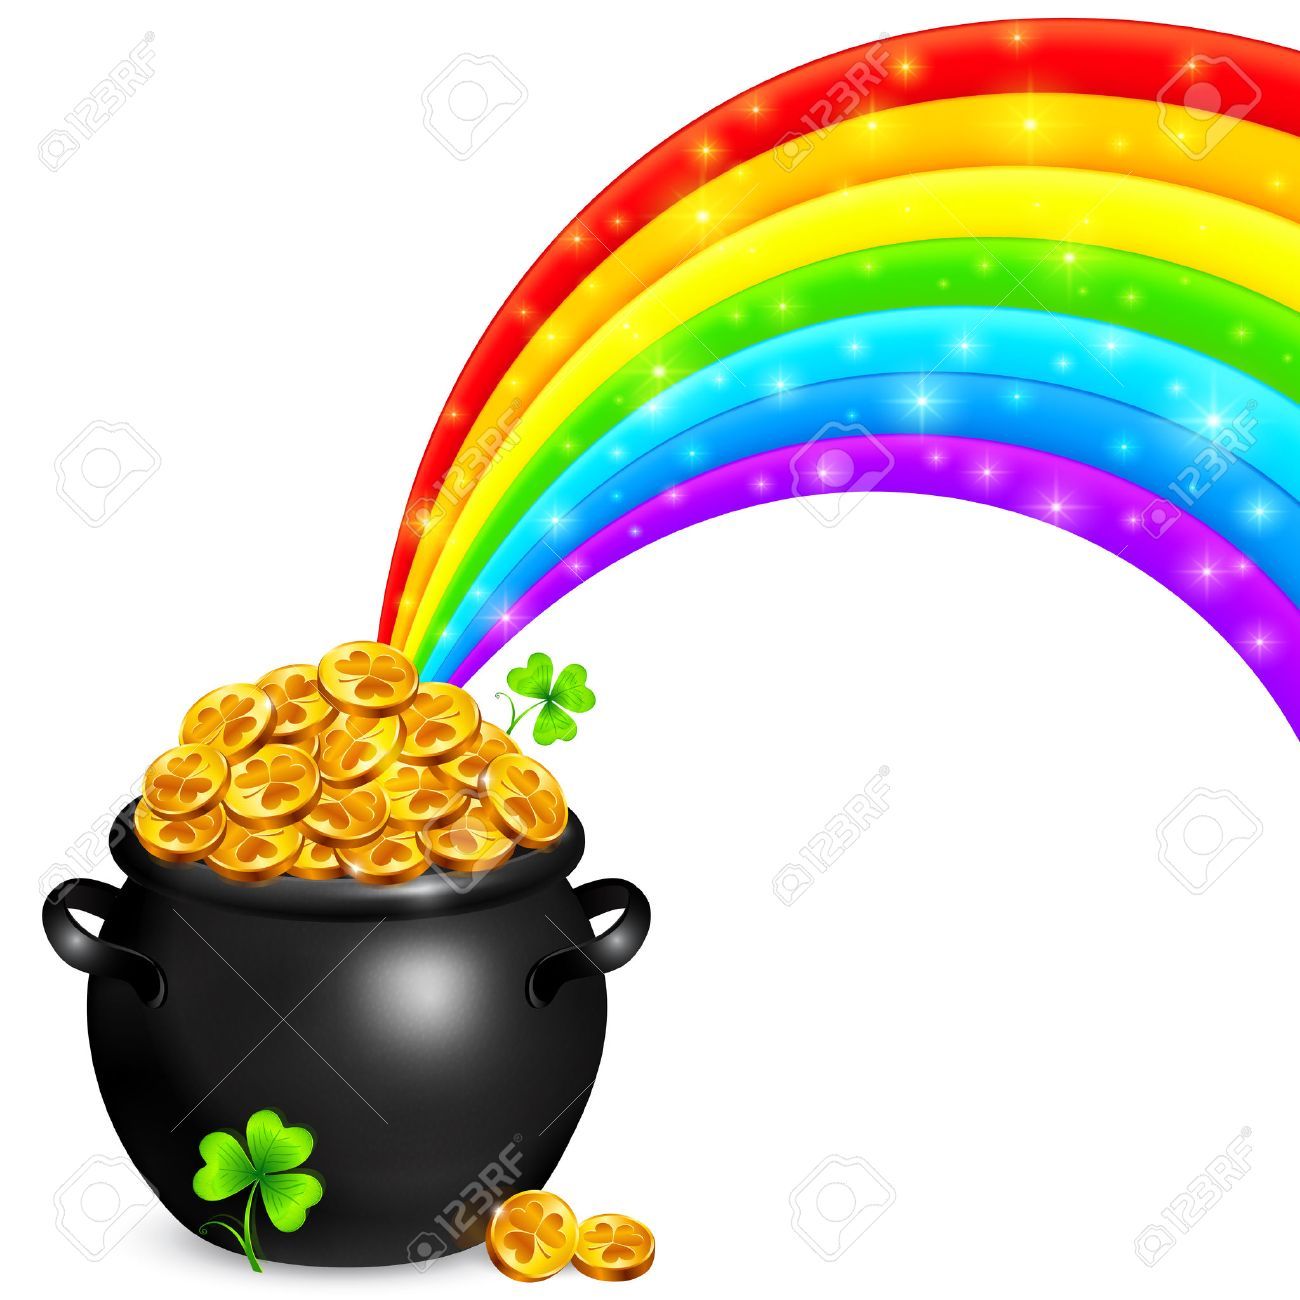 Rainbow with pot of gold clipart 2 » Clipart Portal.